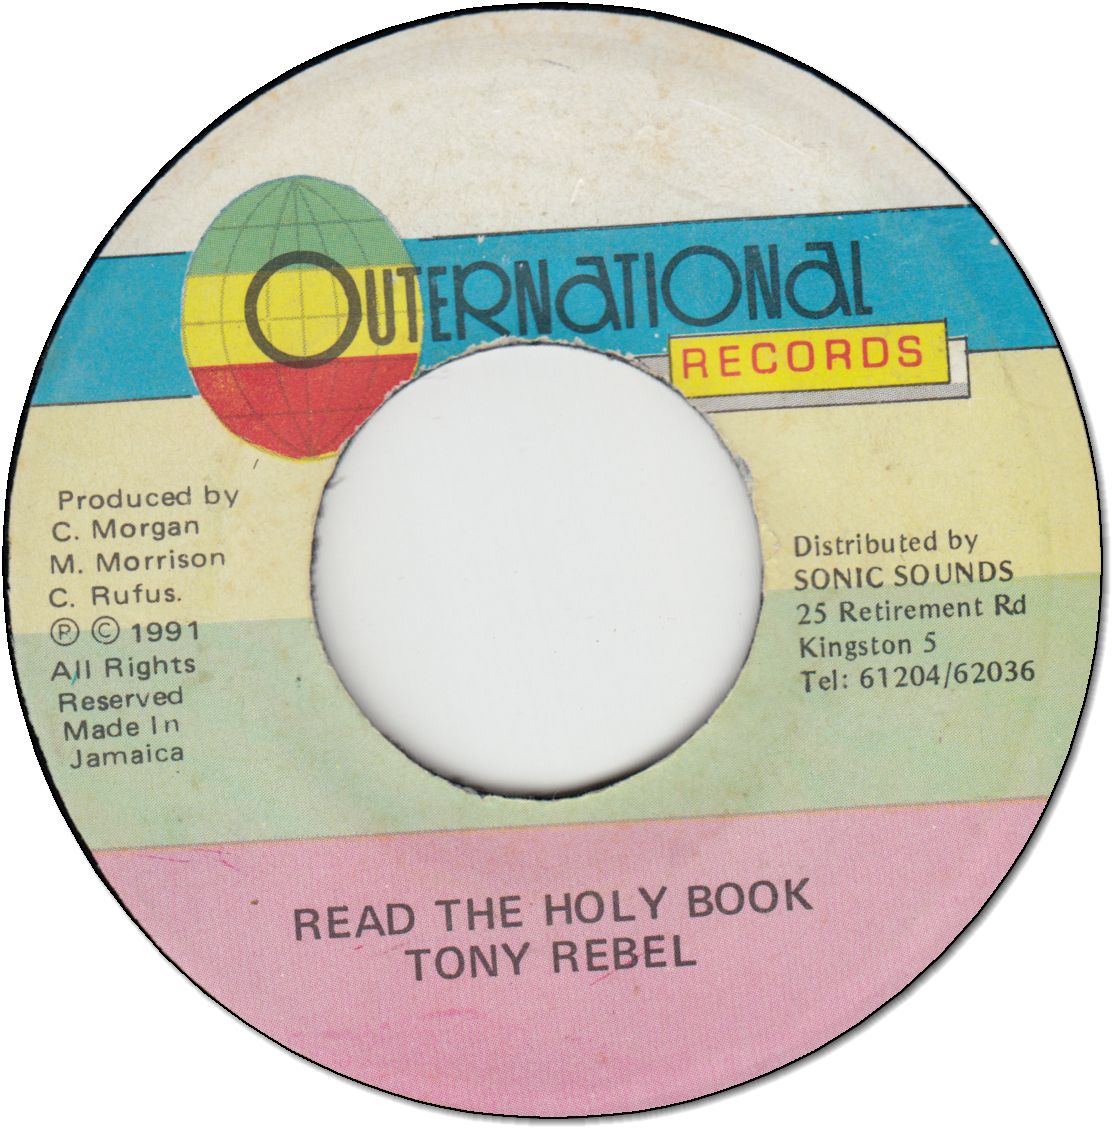 READ THE HOLLY BOOK (VG to VG+)